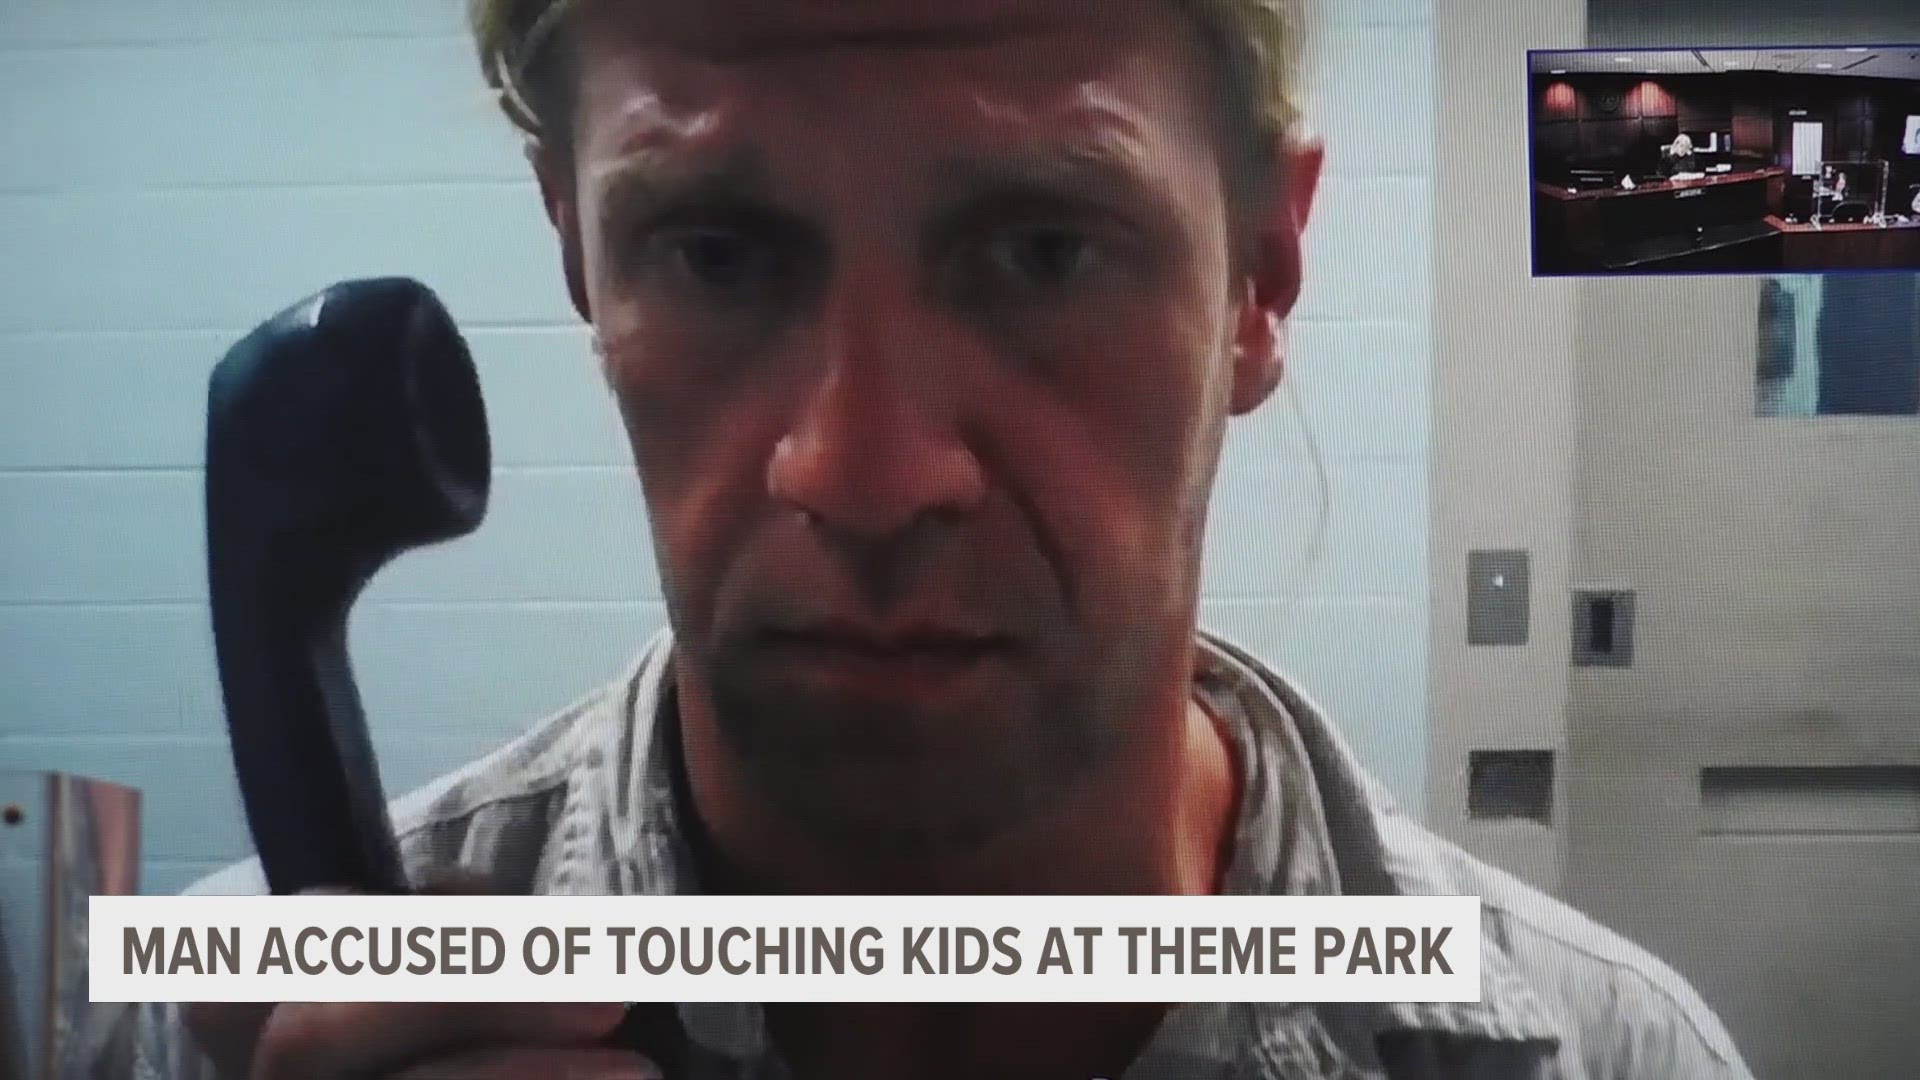 A Mid-Michigan man is accused of inappropriately touching multiple children at a West Michigan theme park.